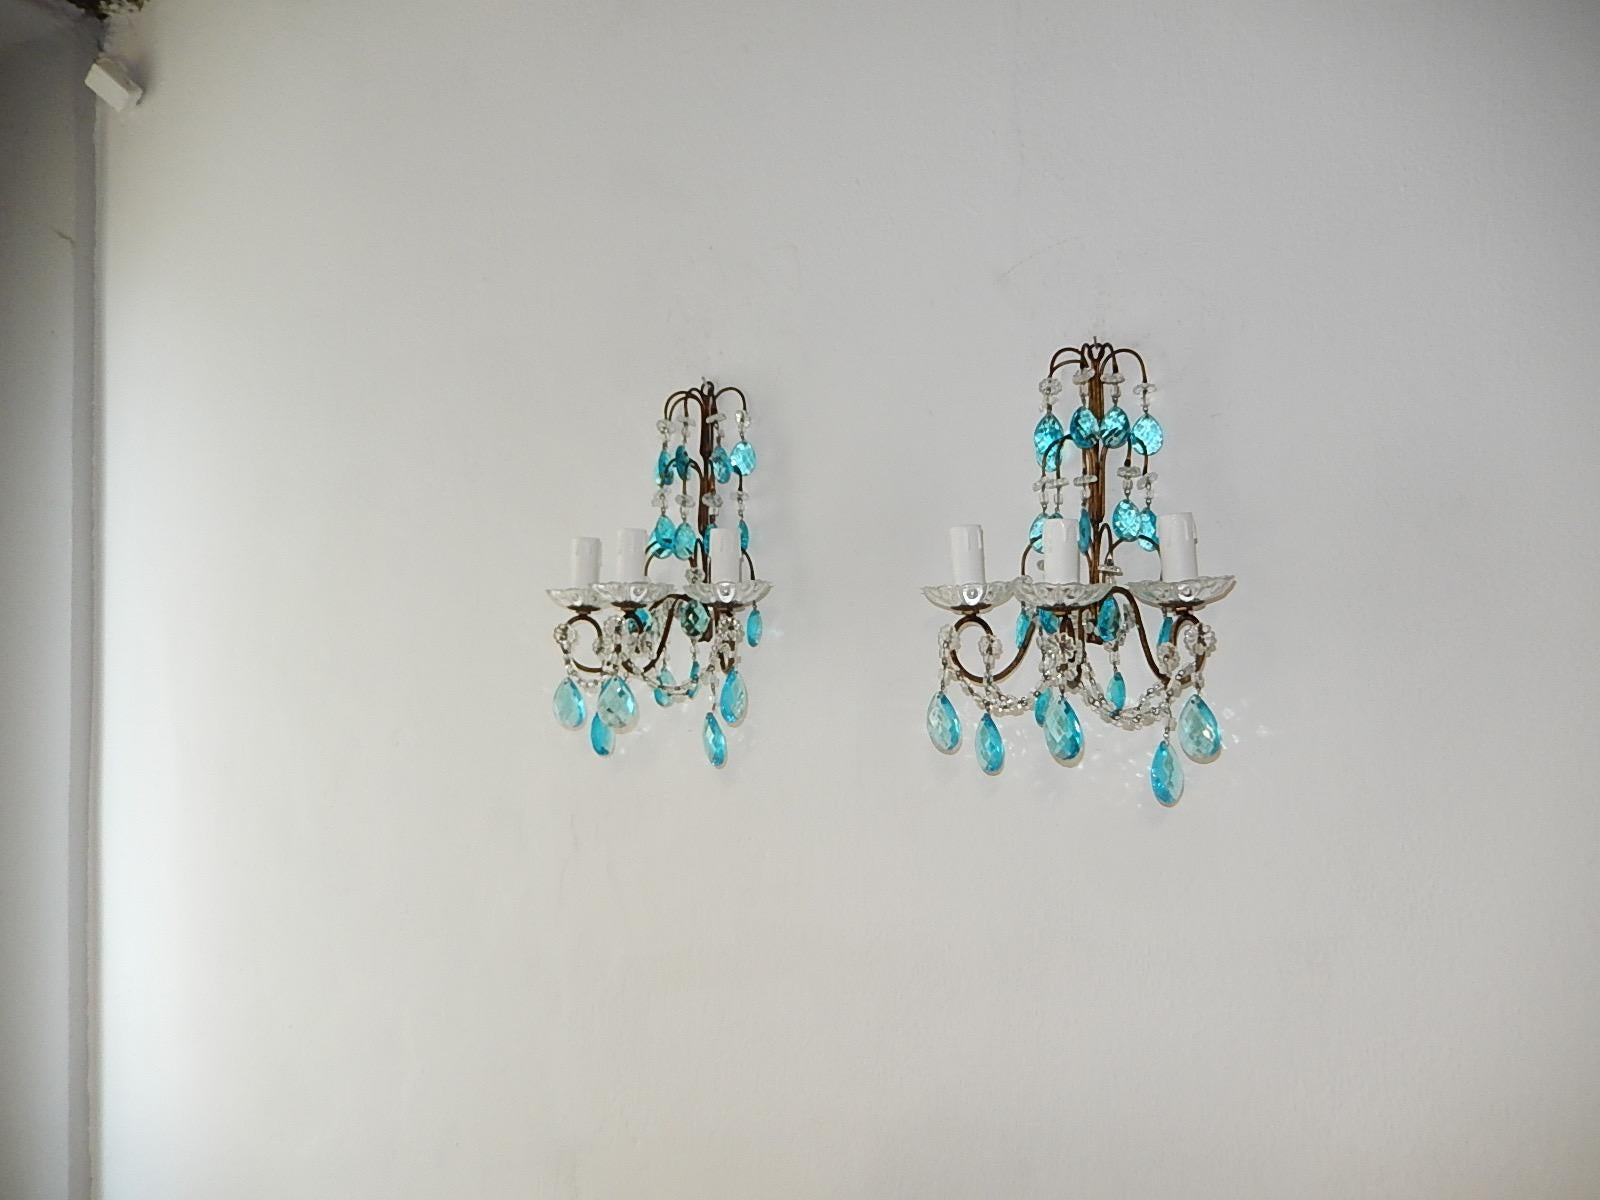 Early 20th Century 1920 French Aqua Blue Crystal Prisms and Swags Sconces For Sale